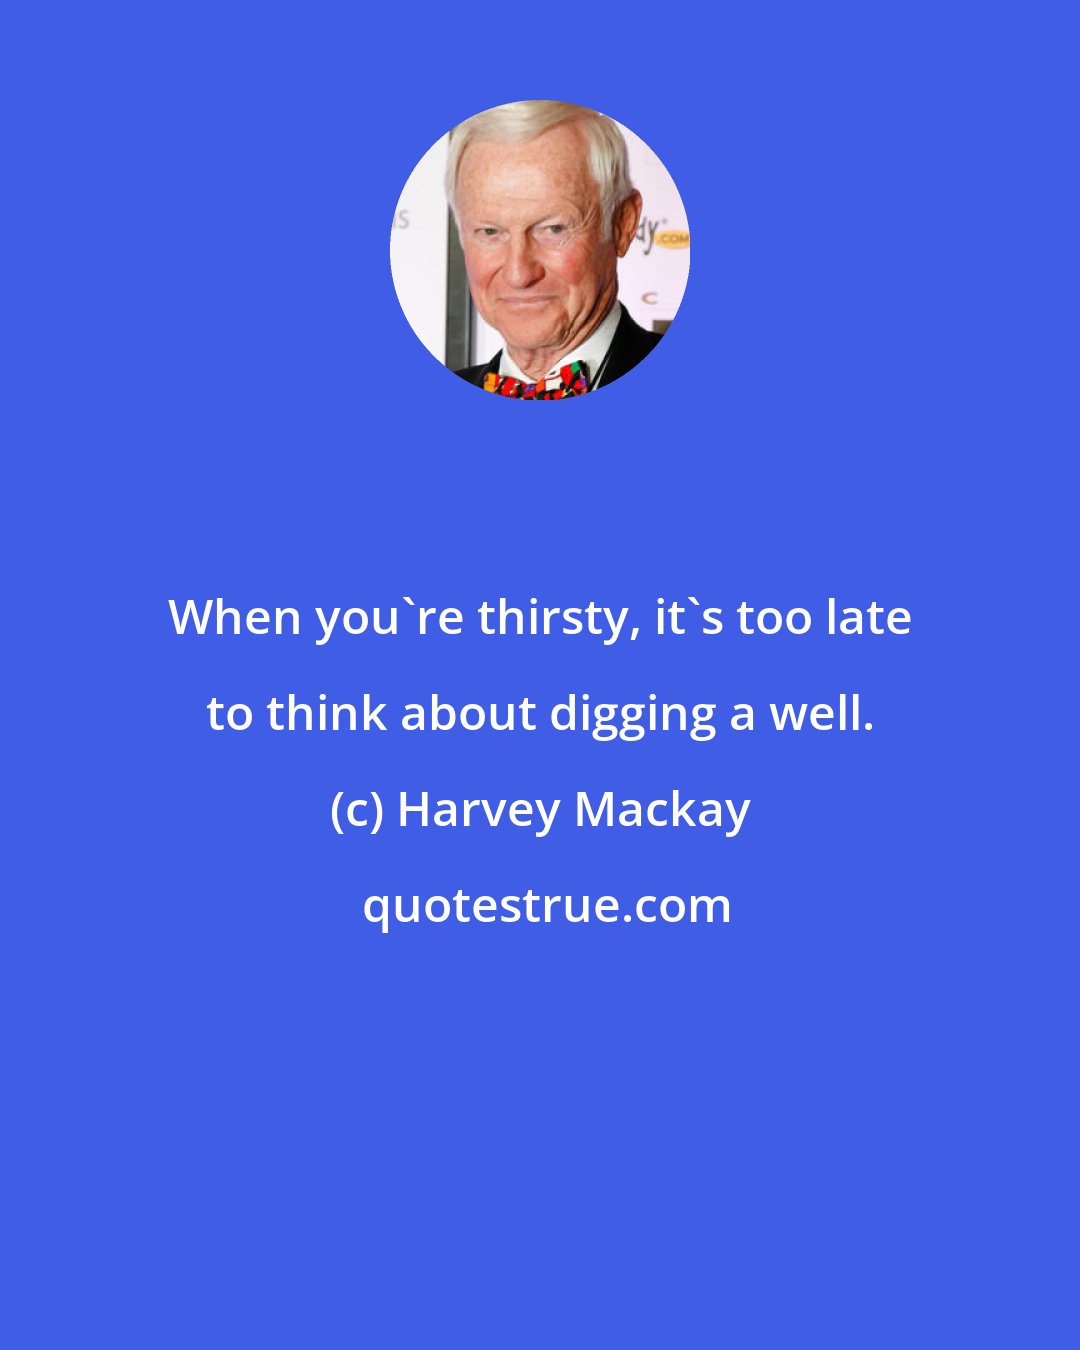 Harvey Mackay: When you're thirsty, it's too late to think about digging a well.